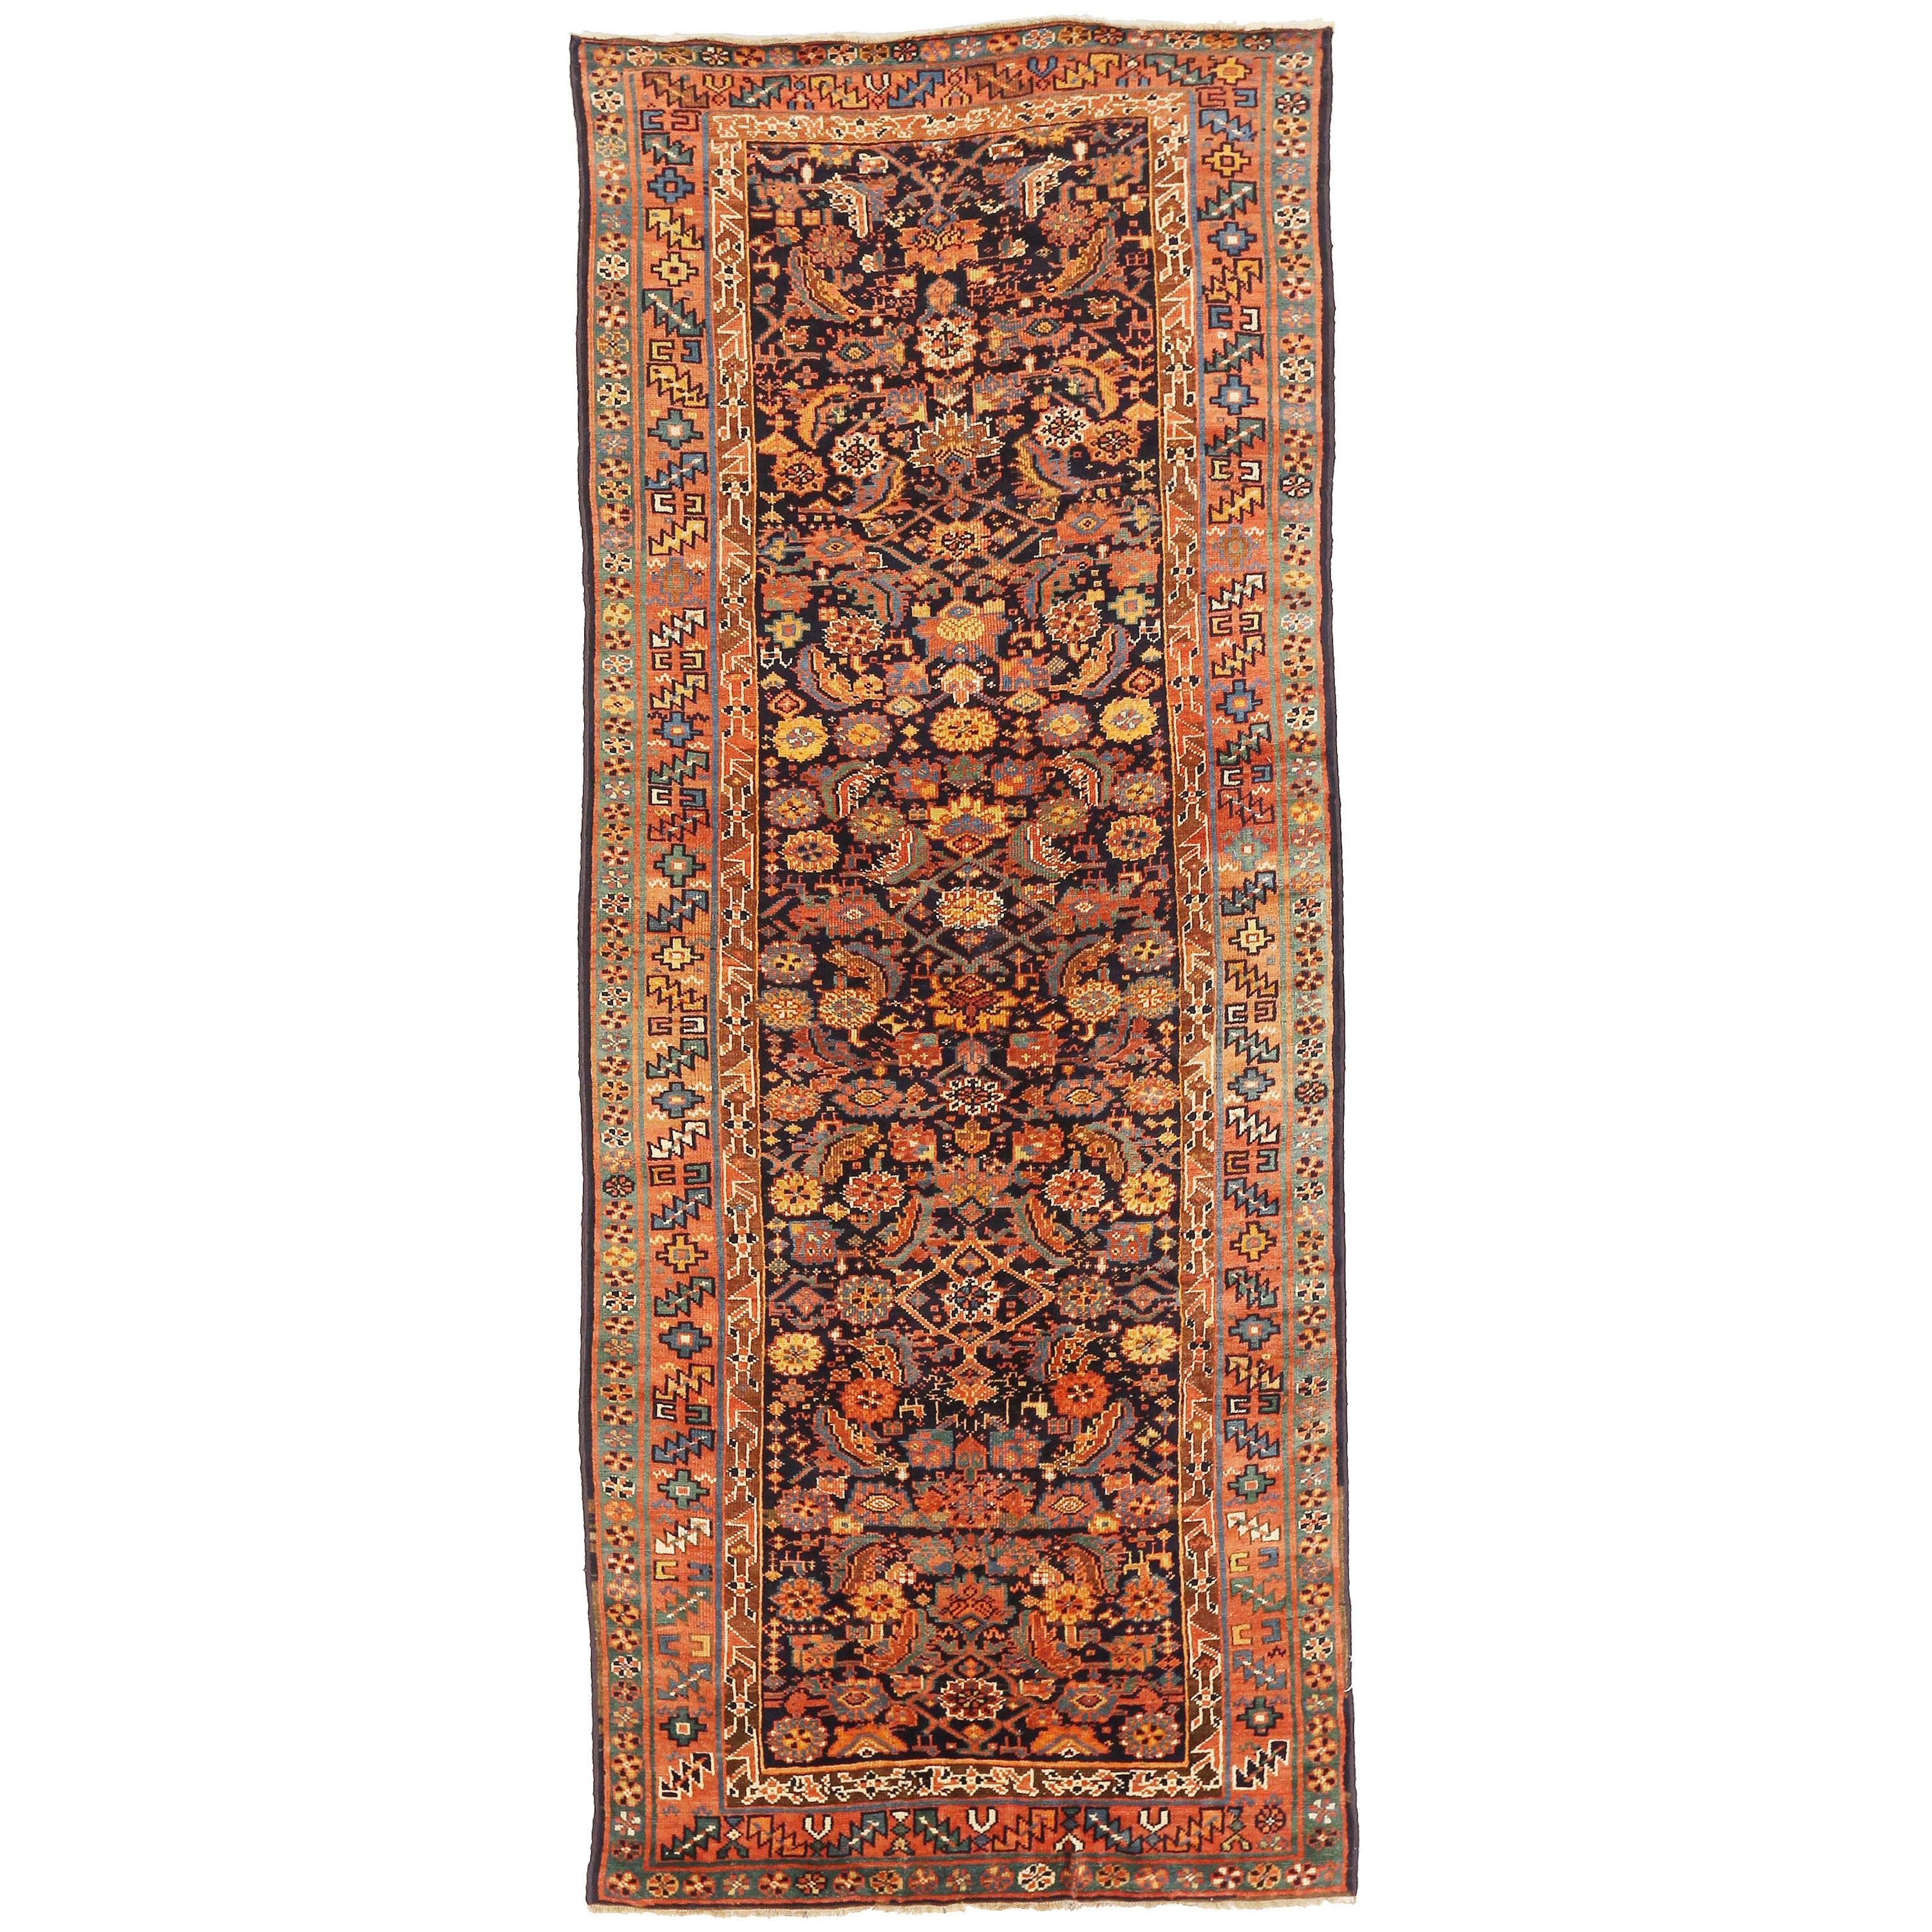 Antique Azerbaijan Rug with Blue and Gold All-Over Floral Details